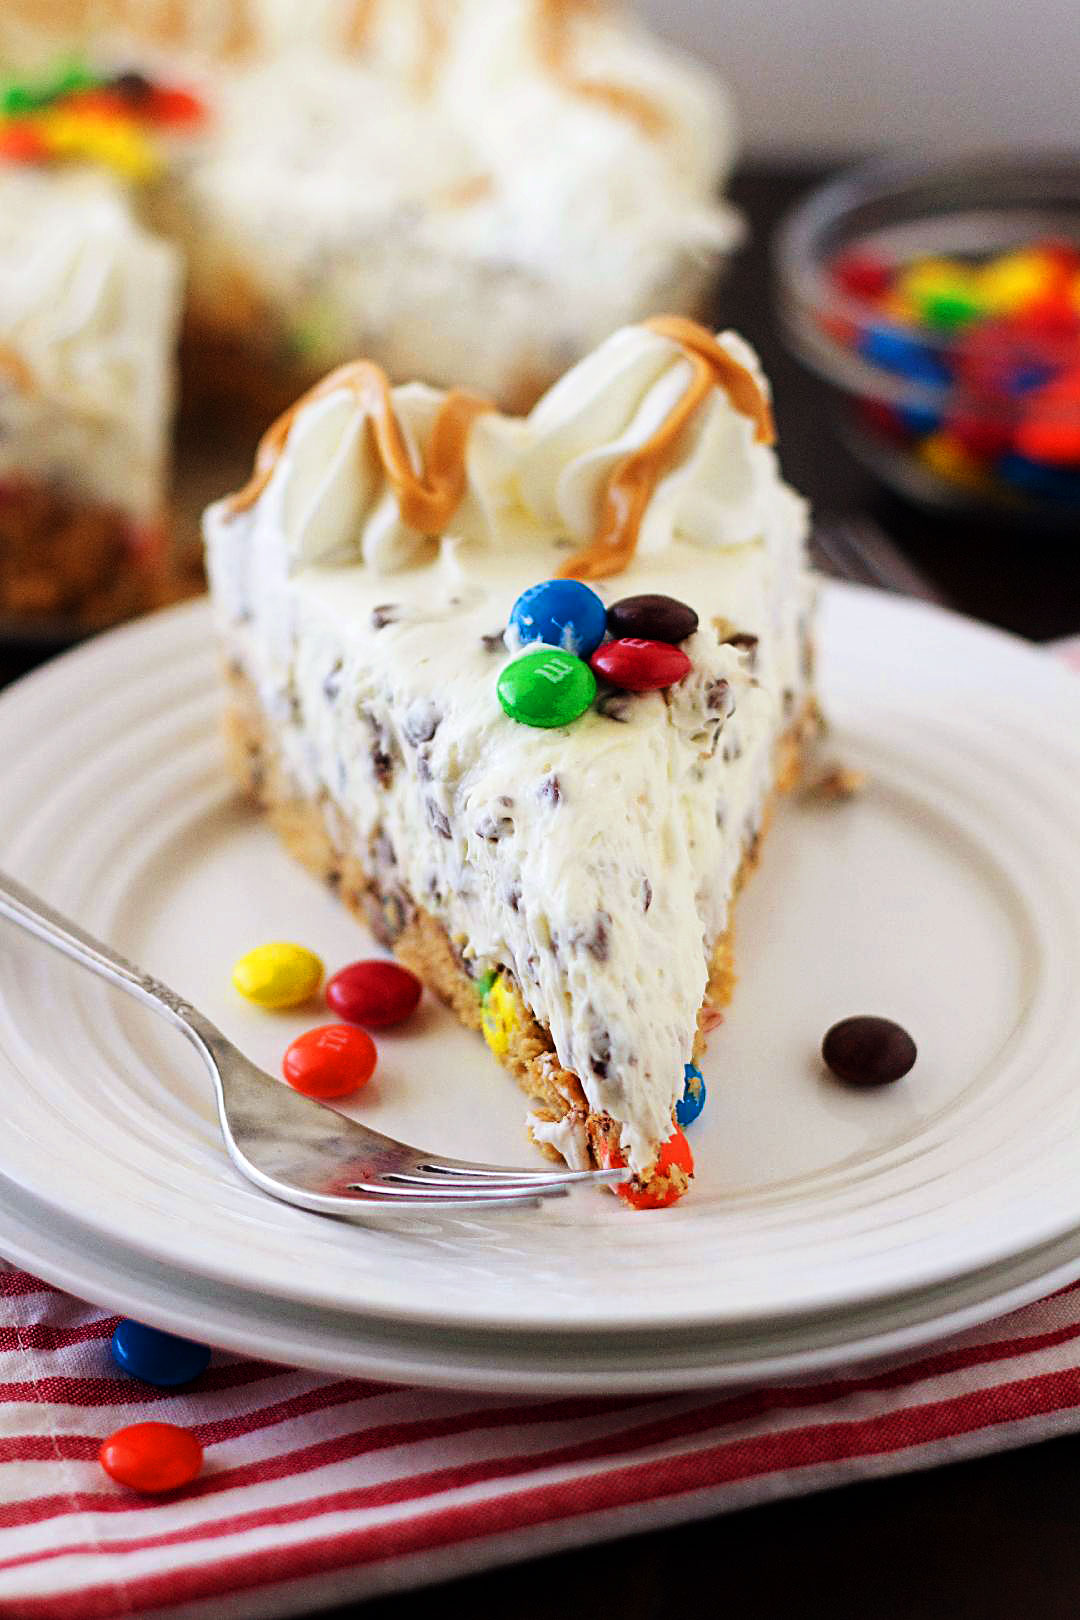 Monster Cookie Dough Cheesecake has a crust that is a monster cookie dough loaded with M&M’s and mini chocolate chips and topped with a creamy cheesecake filling loaded with mini chocolate chips. Life-in-the-Lofthouse.com